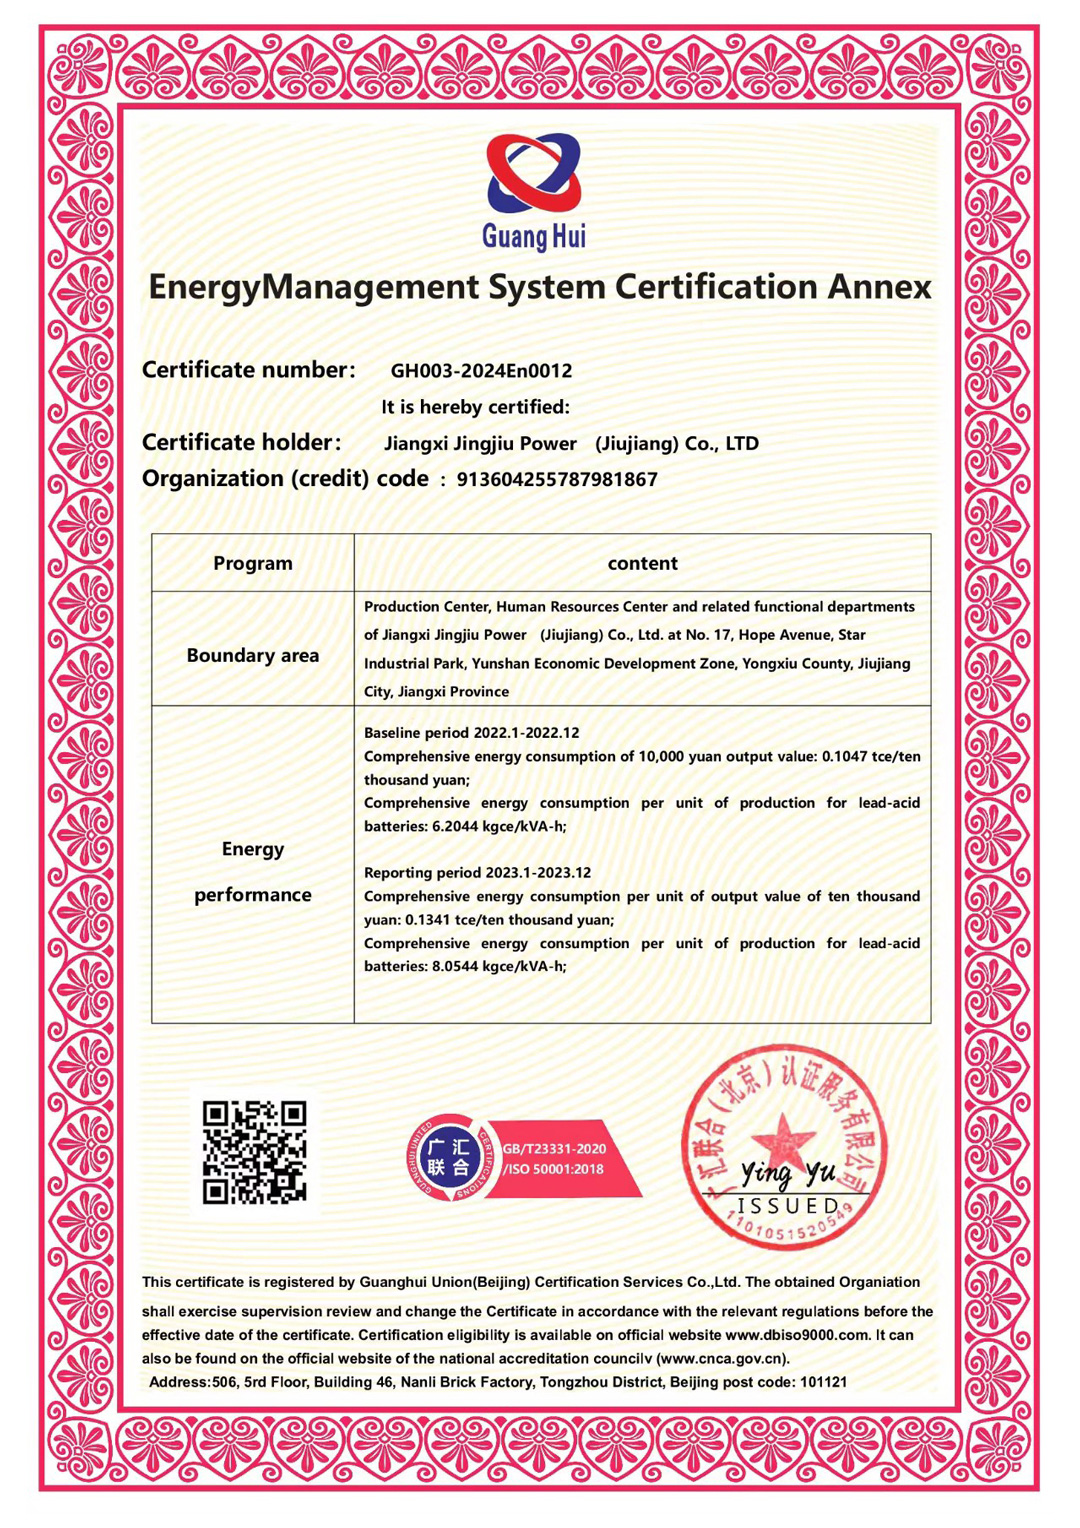 KIJO-Group-Leading-the-Way-in-Energy-Management-System-Certification-with-ISO-500012018-(2).jpg